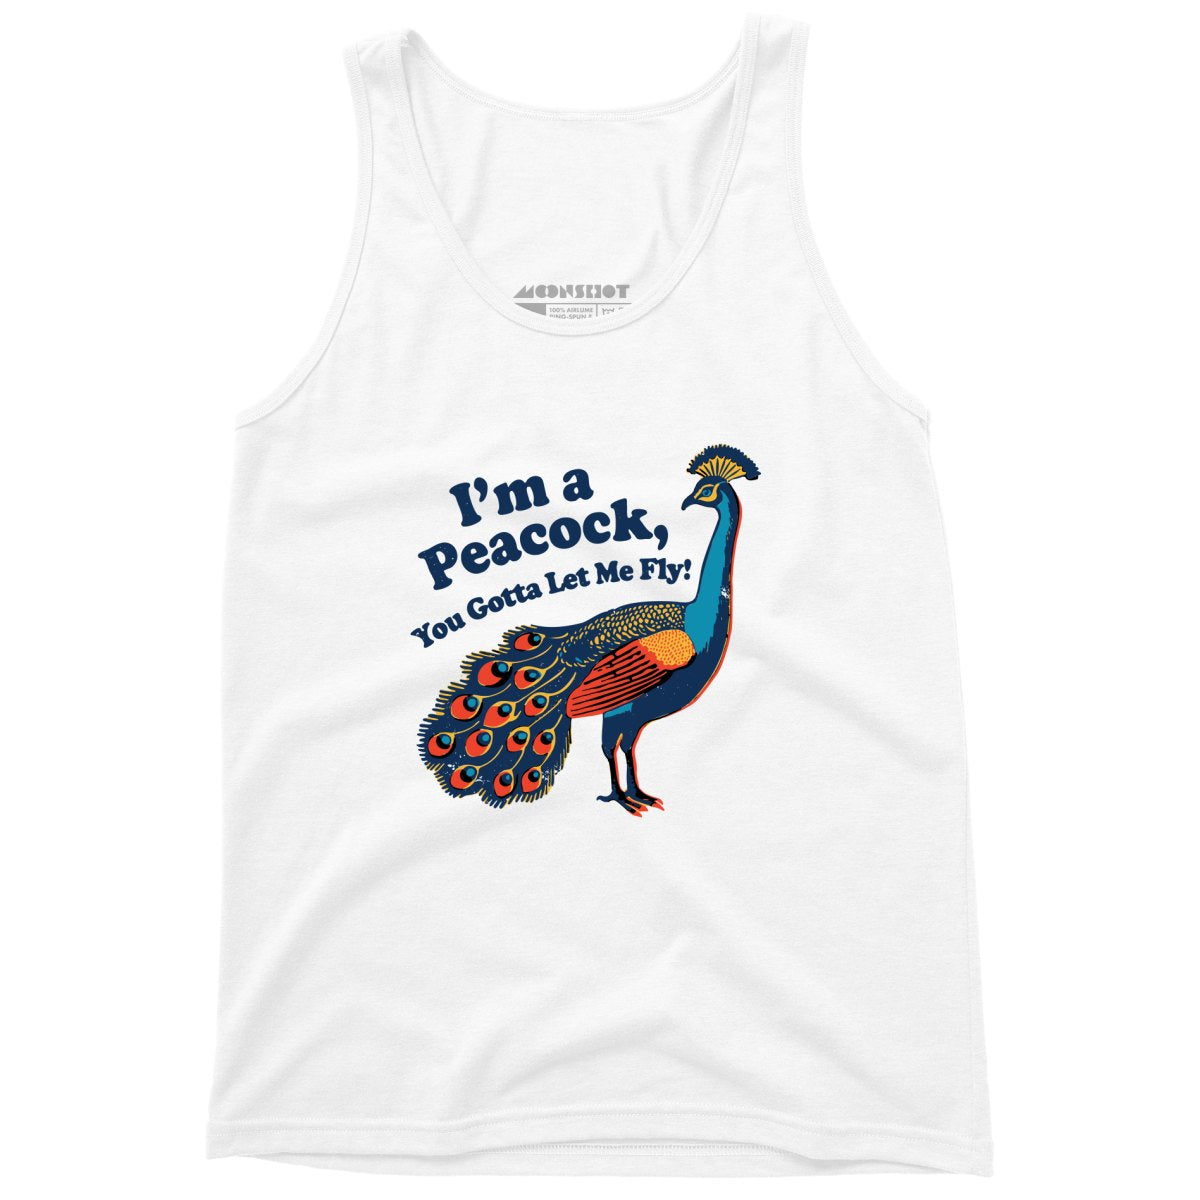 I'm a Peacock You Gotta Let Me Fly - Unisex Tank Top